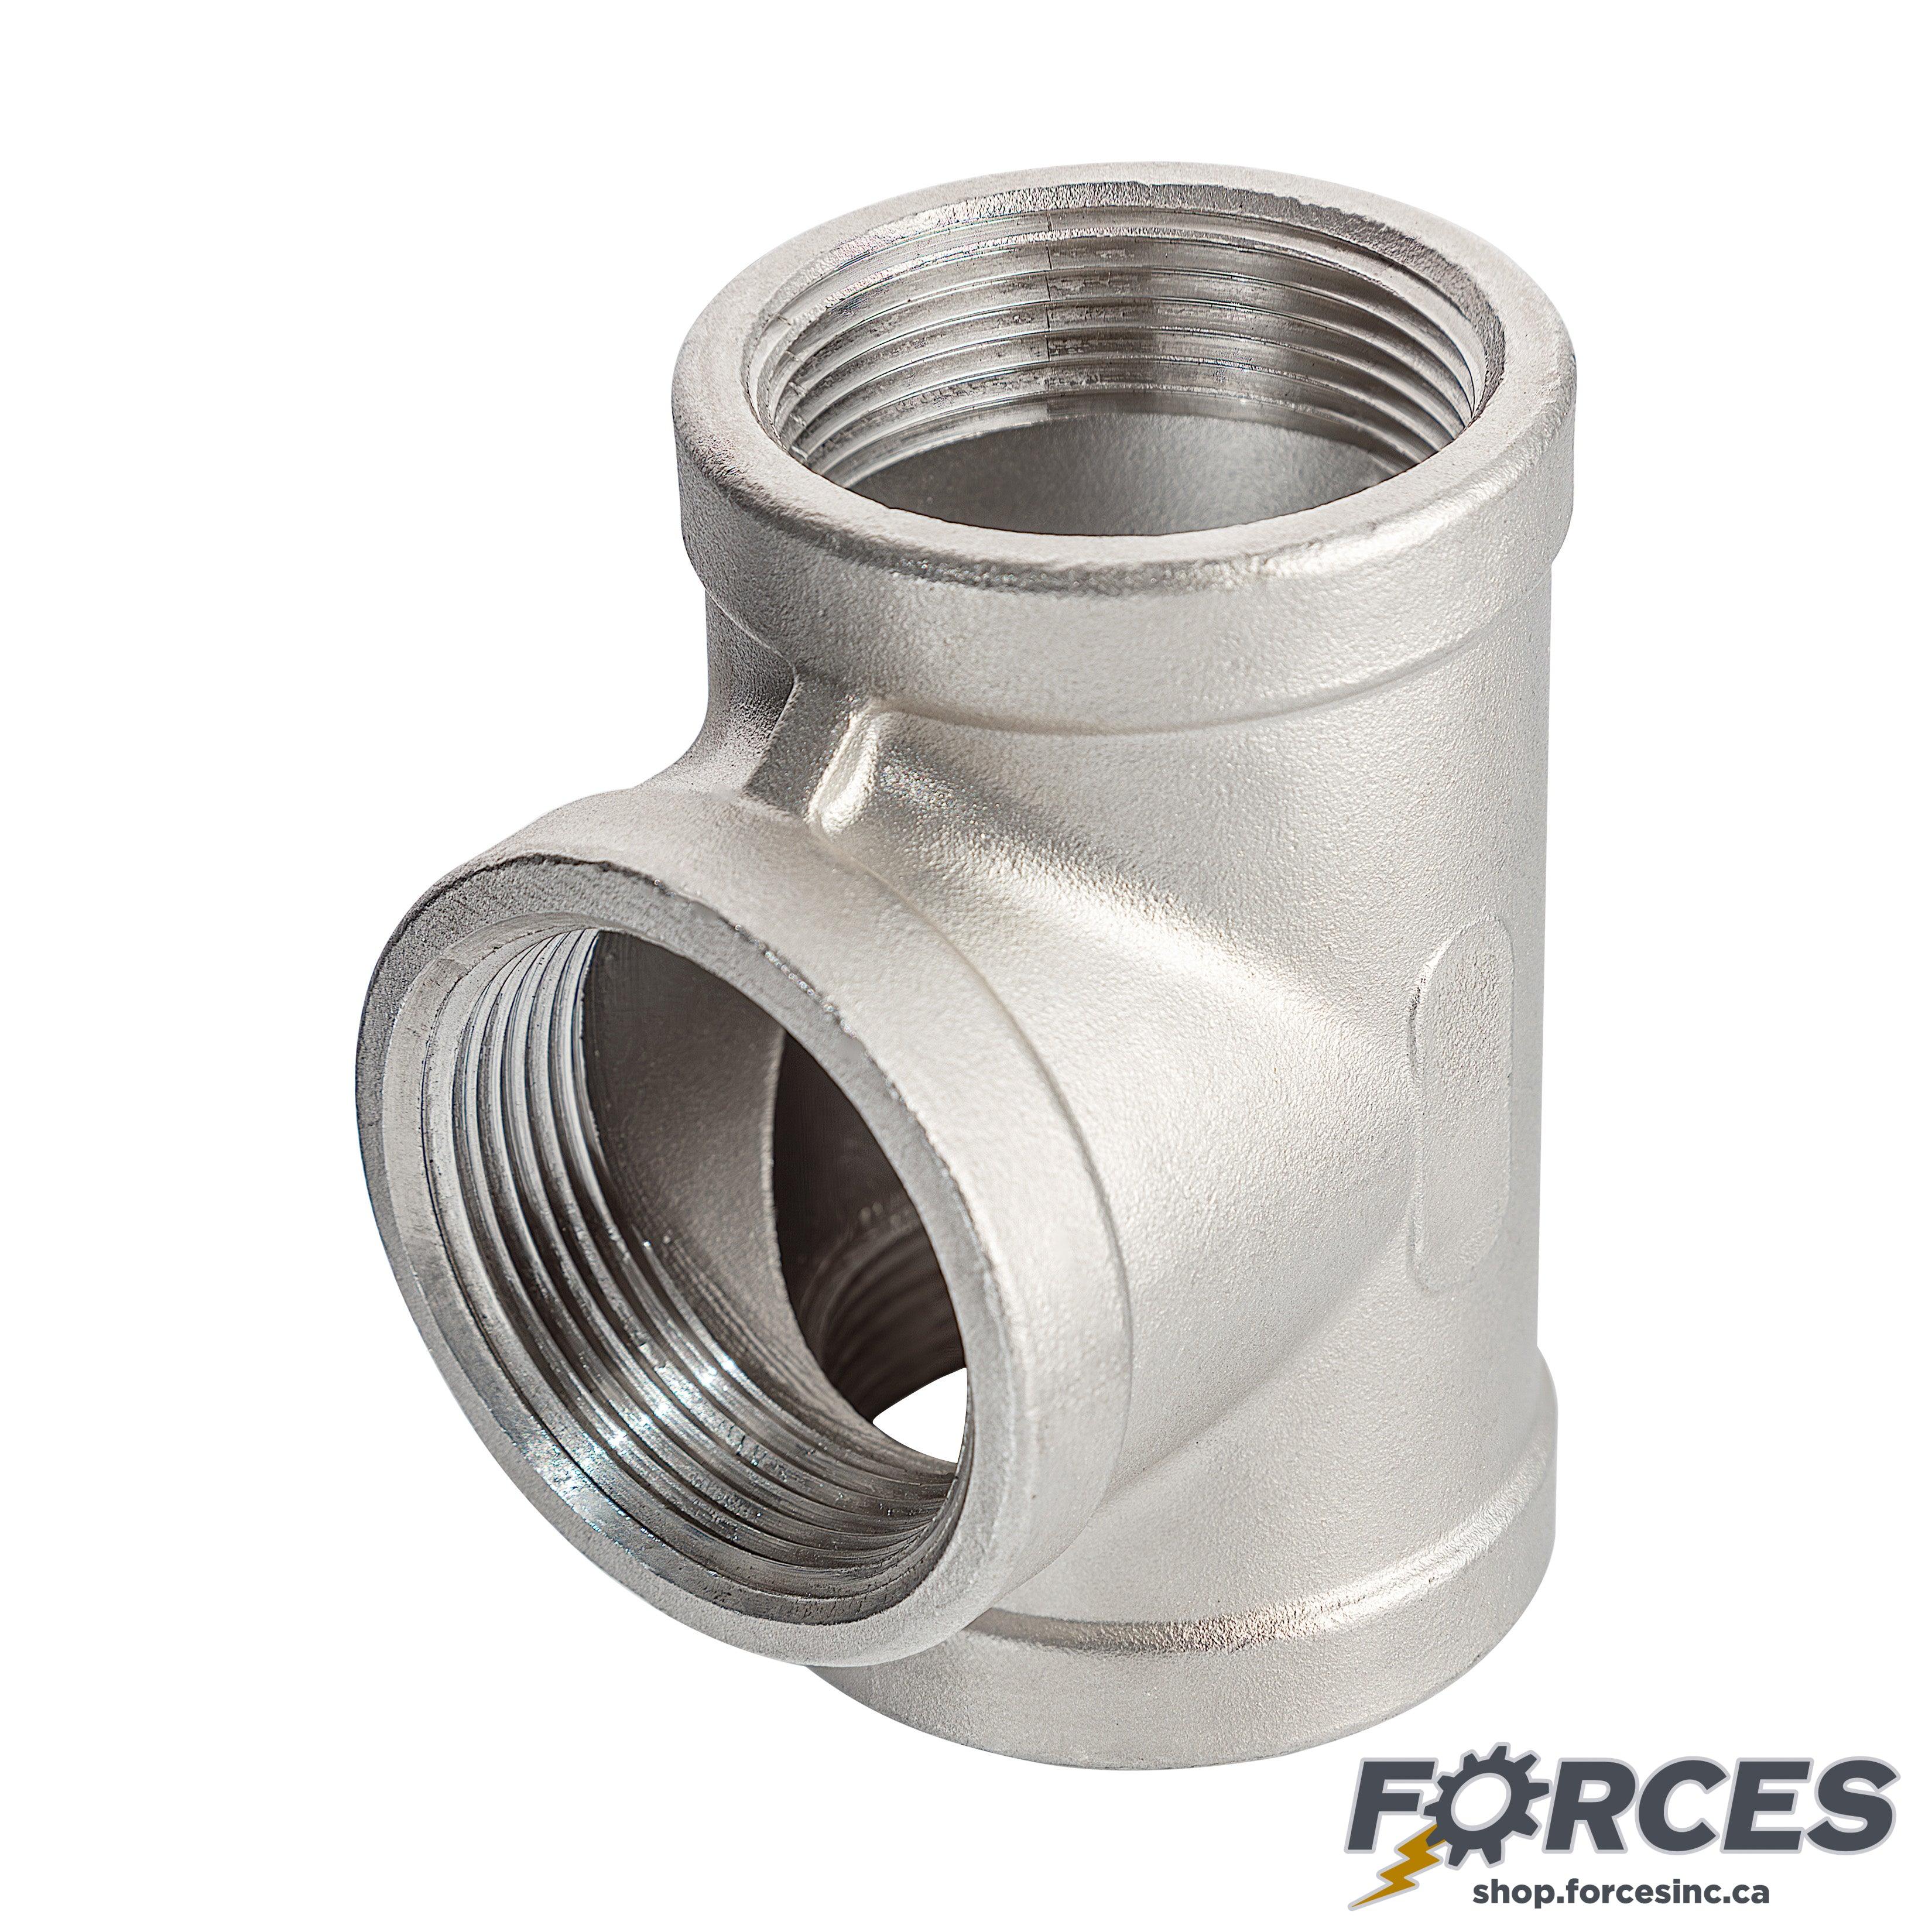 3/4" Tee NPT #150 - Stainless Steel 316 - Forces Inc